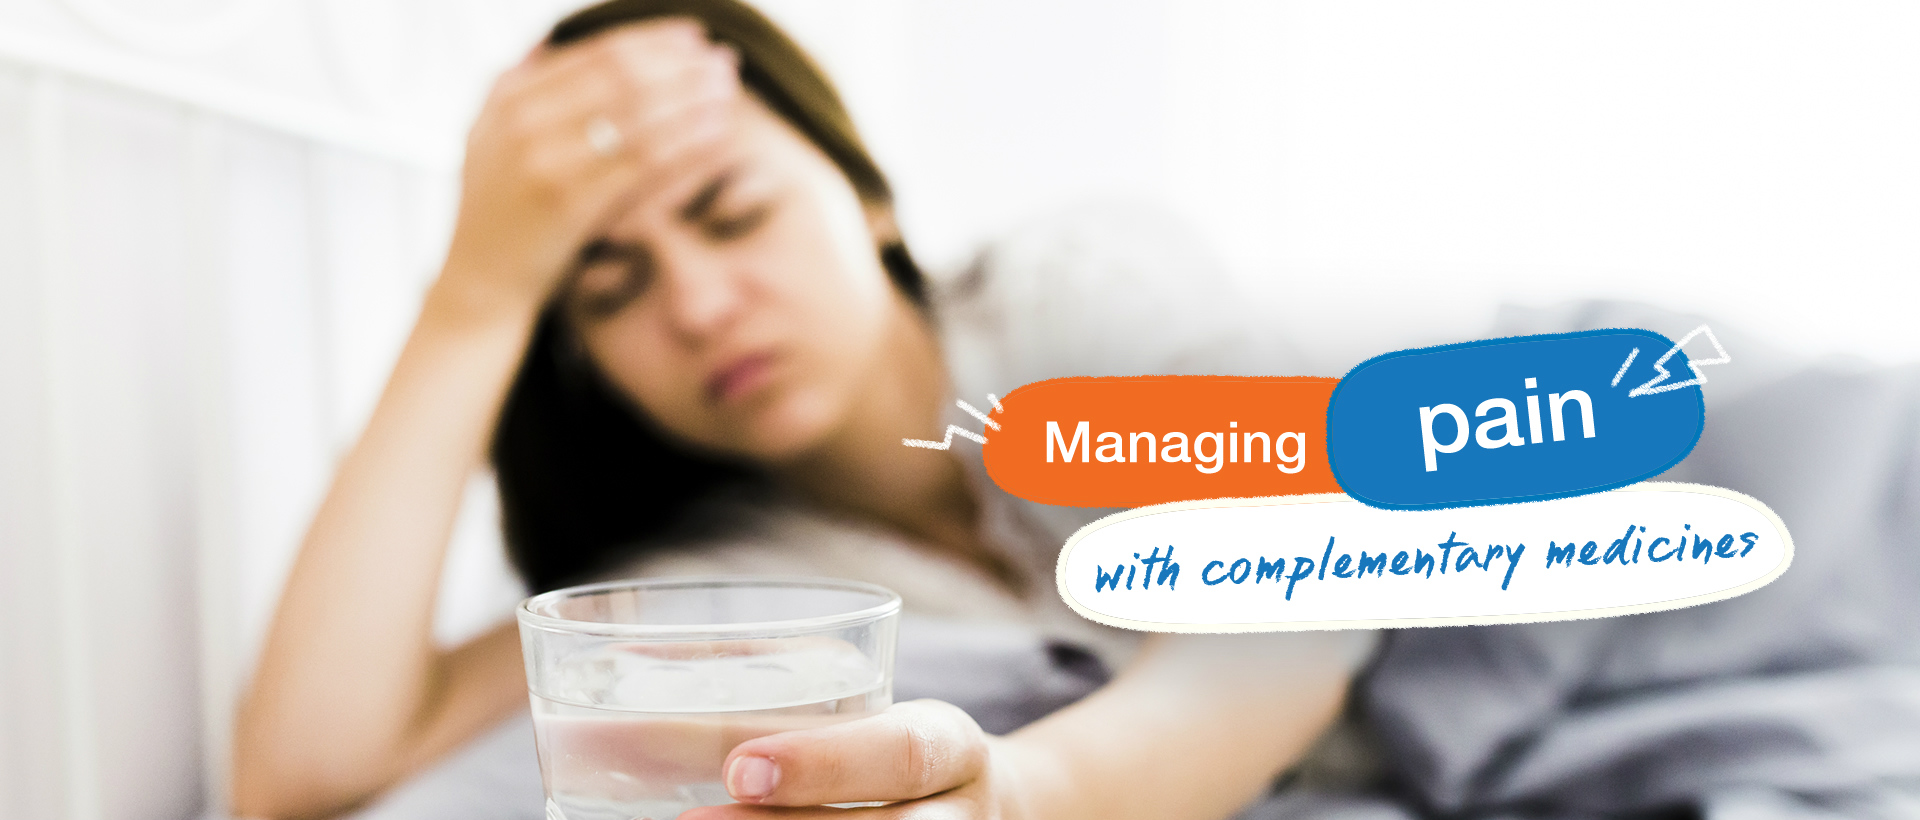 Managing pain with complementary medicines